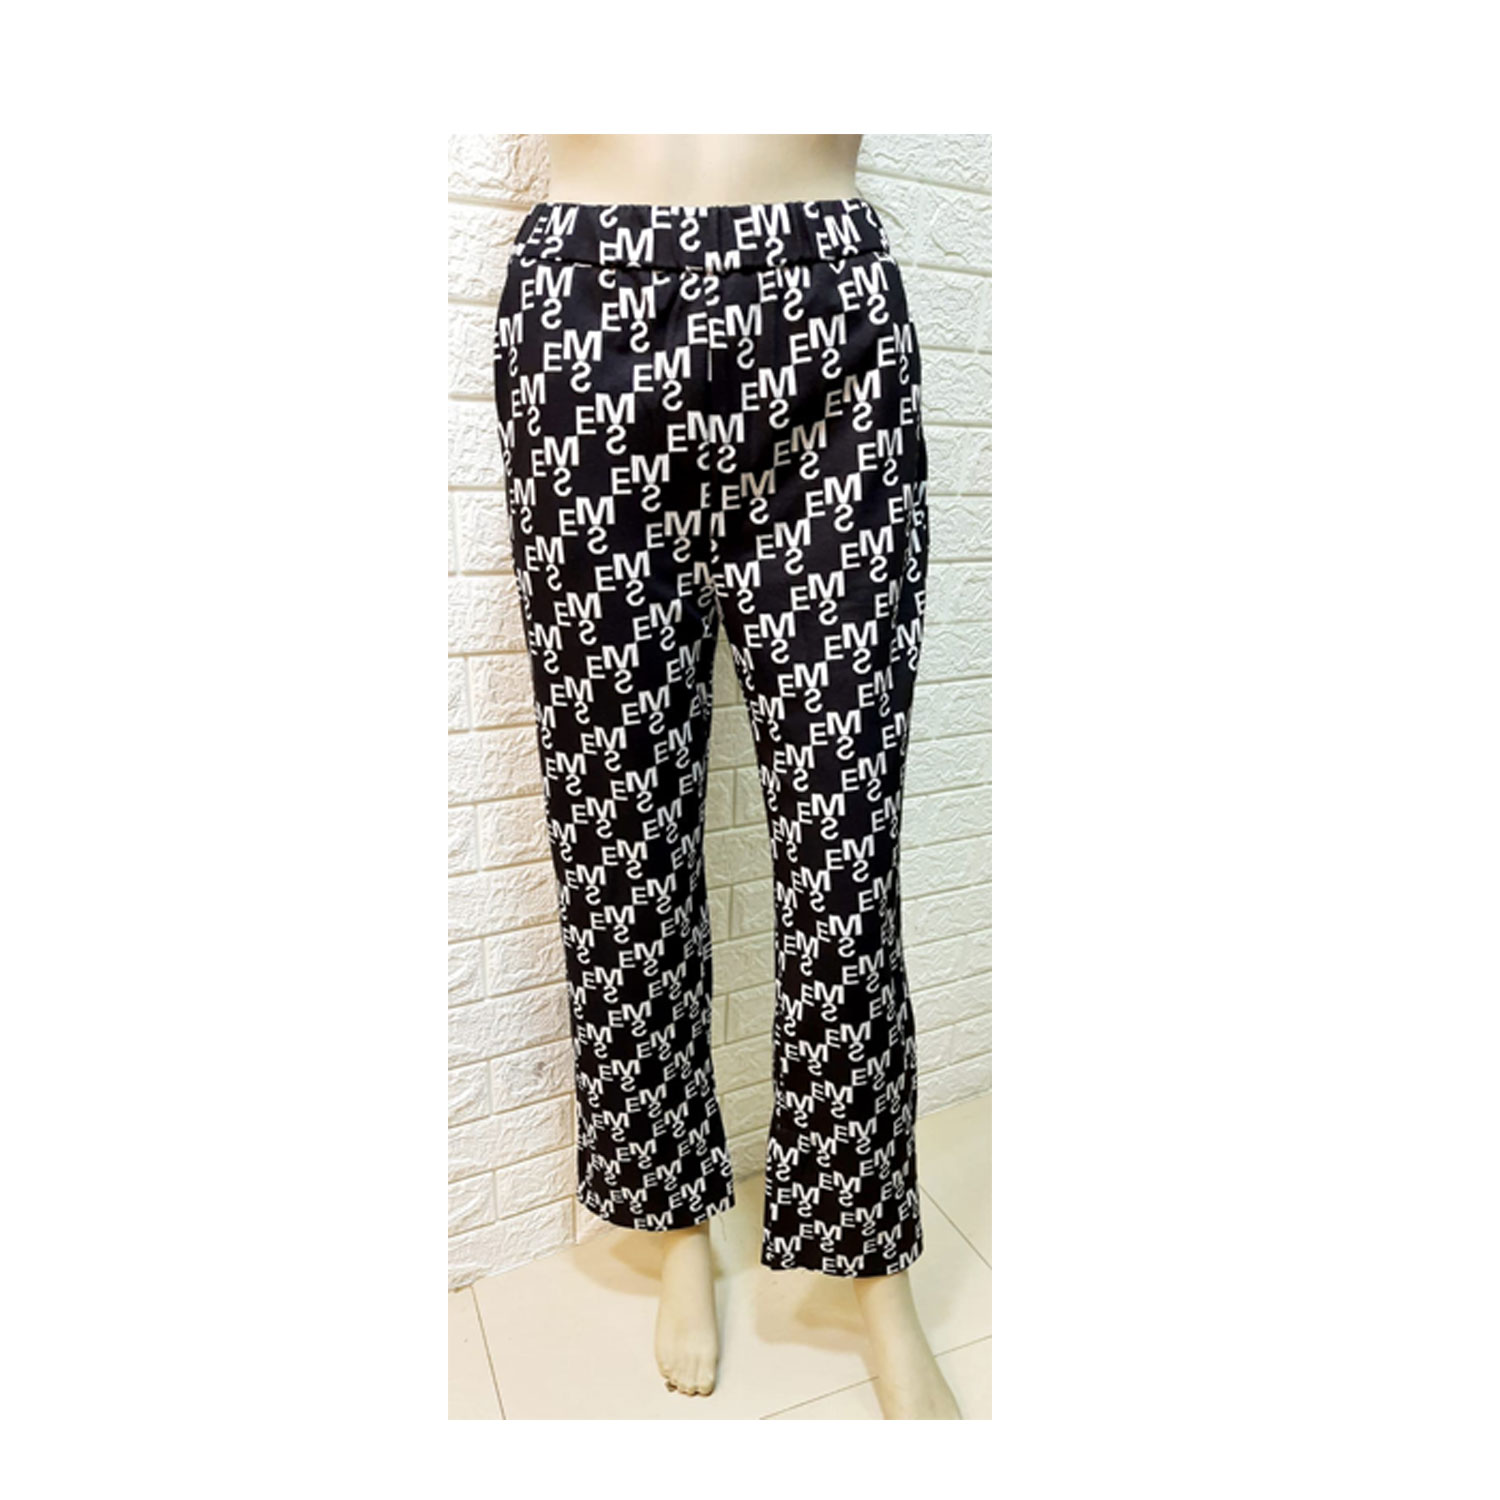 SCHNEE Printed Imported Narrow Pants, Lower Pajama For Women & Girls | Combo of 3 Pcs